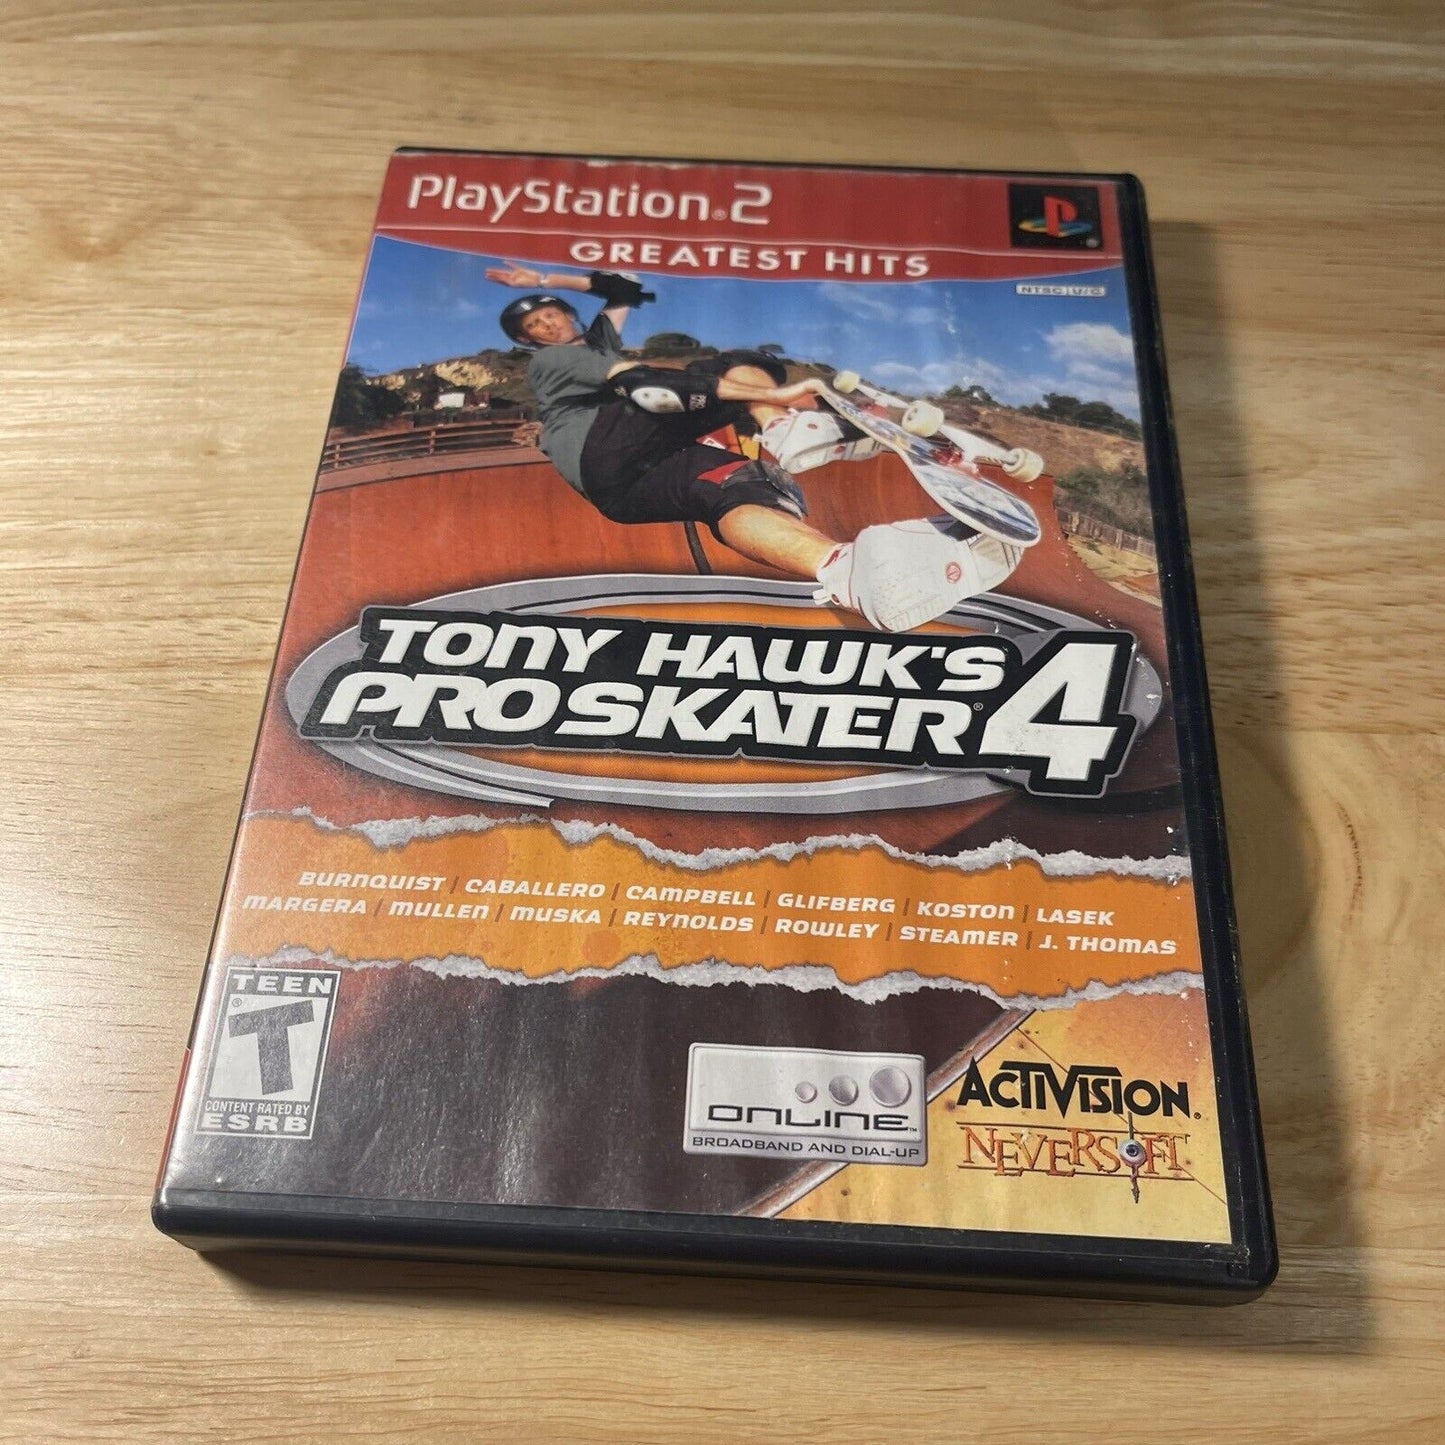 Tony Hawk's Pro Skater 4 - Complete PlayStation 2 PS2 Game CIB - Tested & Works